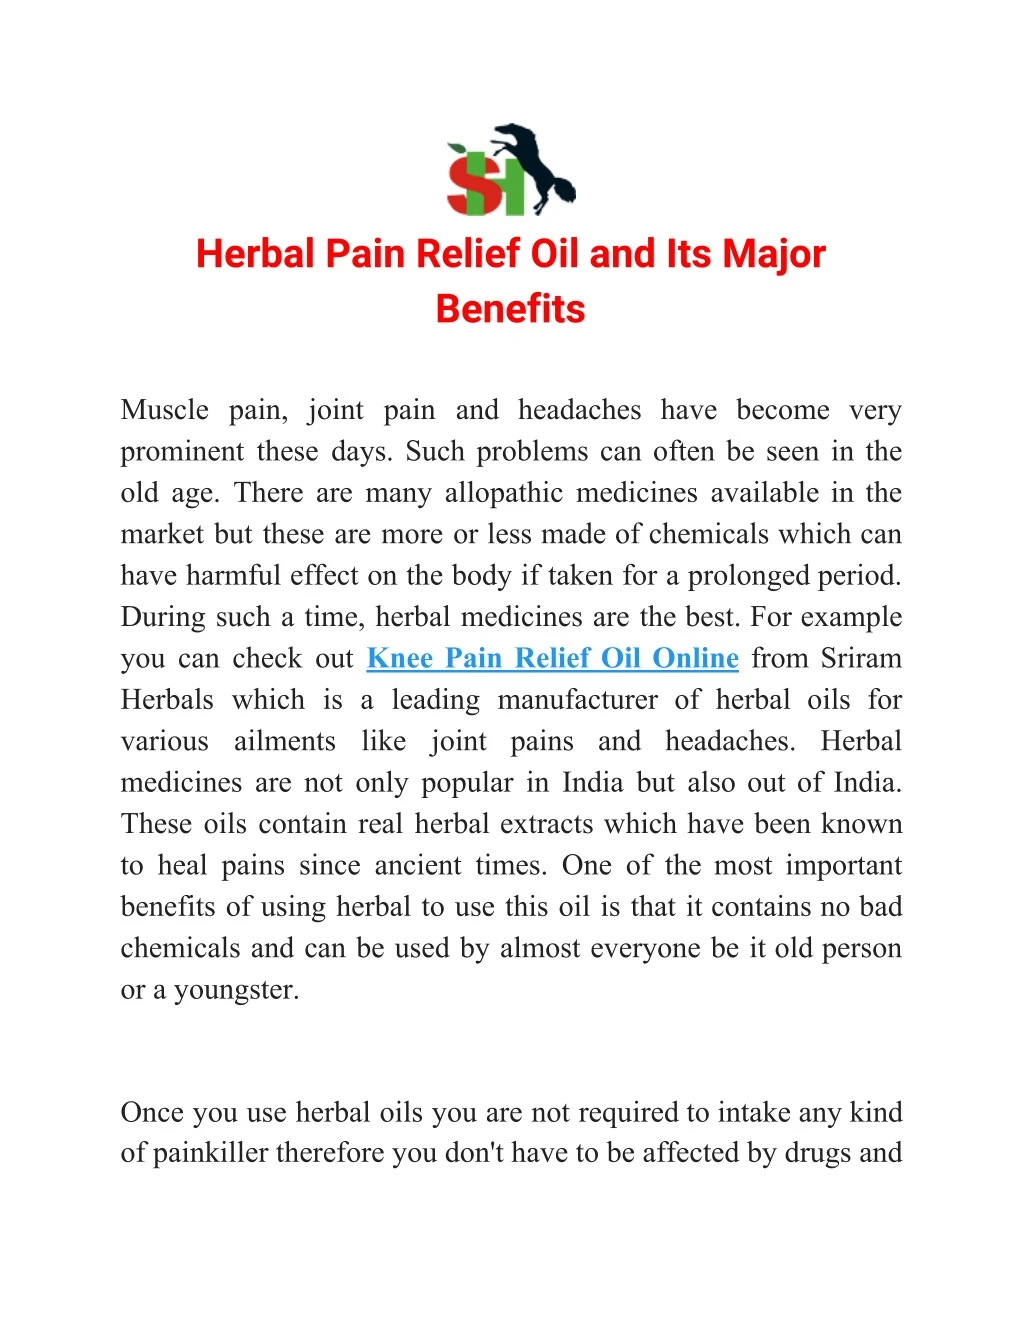 herbal pain relief oil and its major benefits